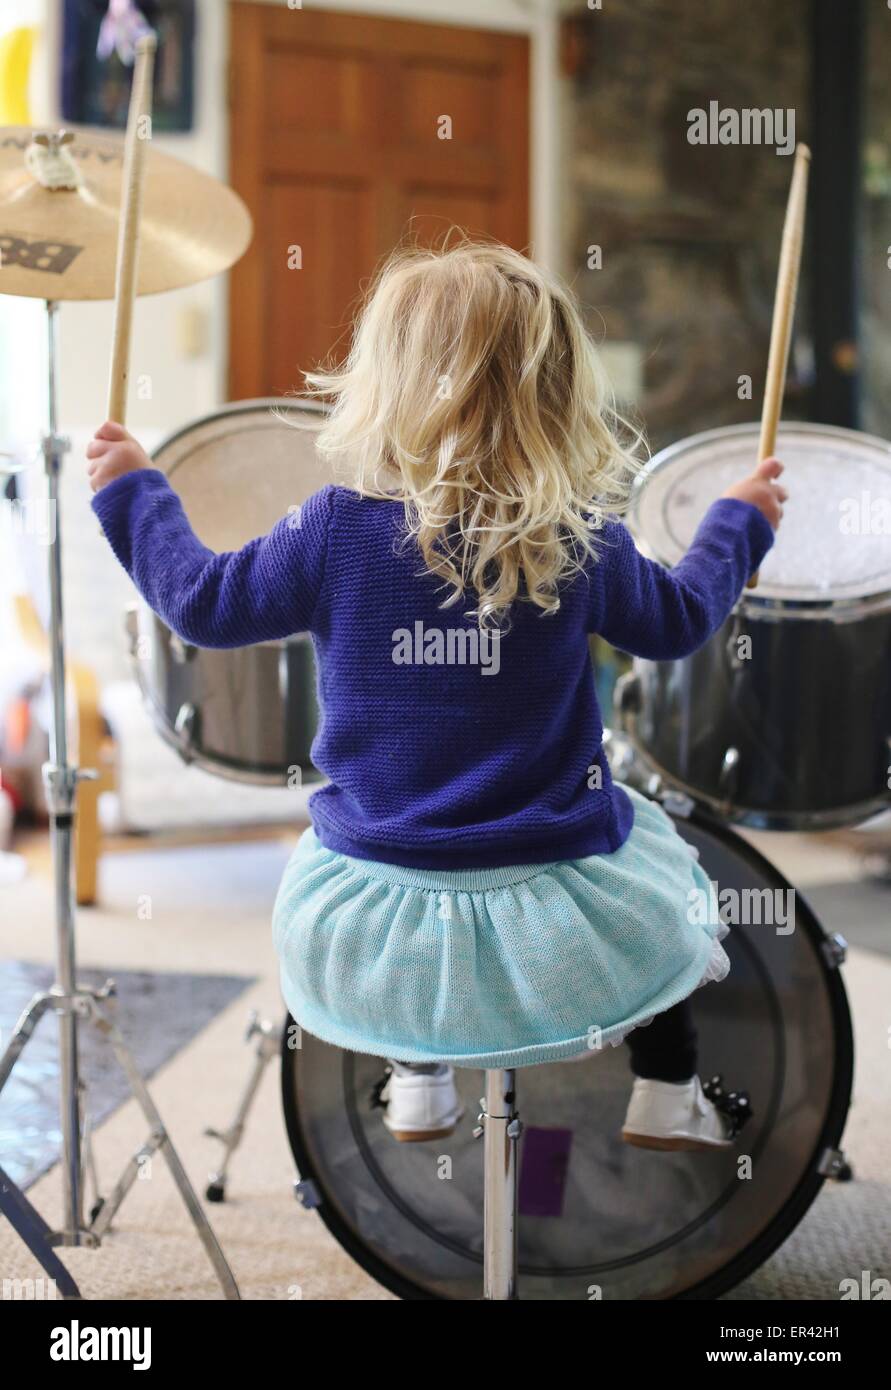 A little girl playing drums as seen from behind. Stock Photo